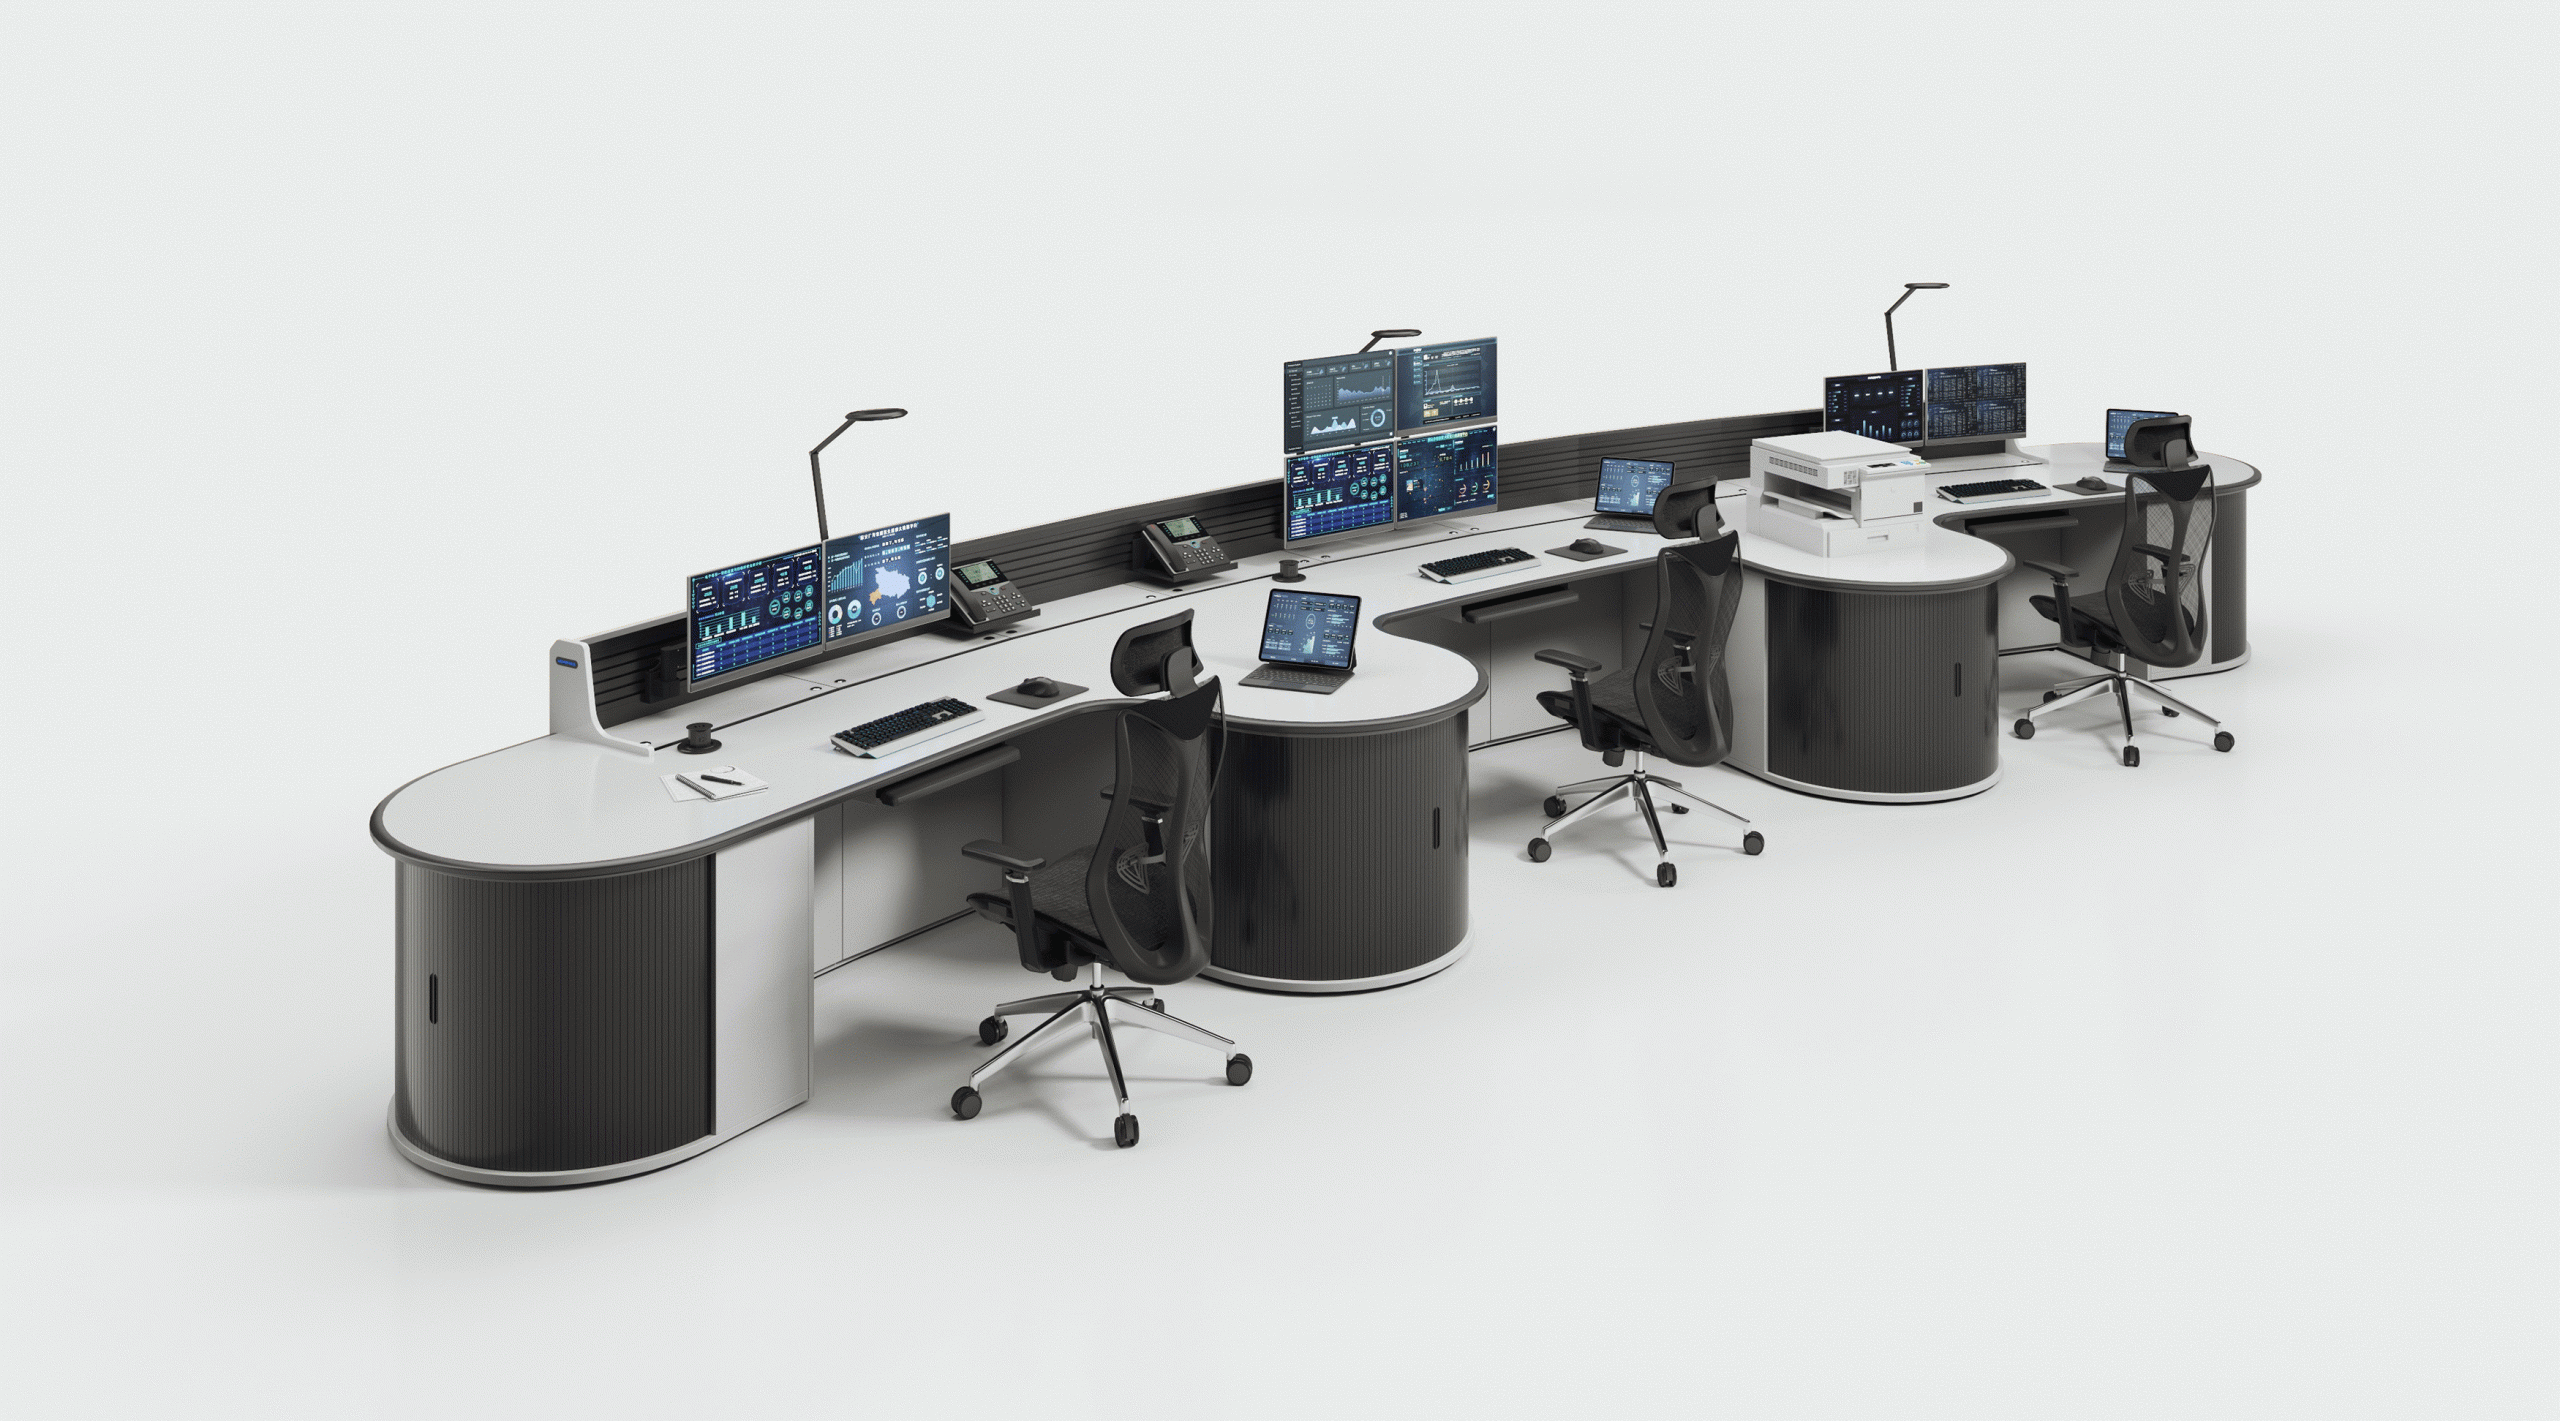 Broadcast Control Console Furniture: Designing the Perfect Setup for Your Studio